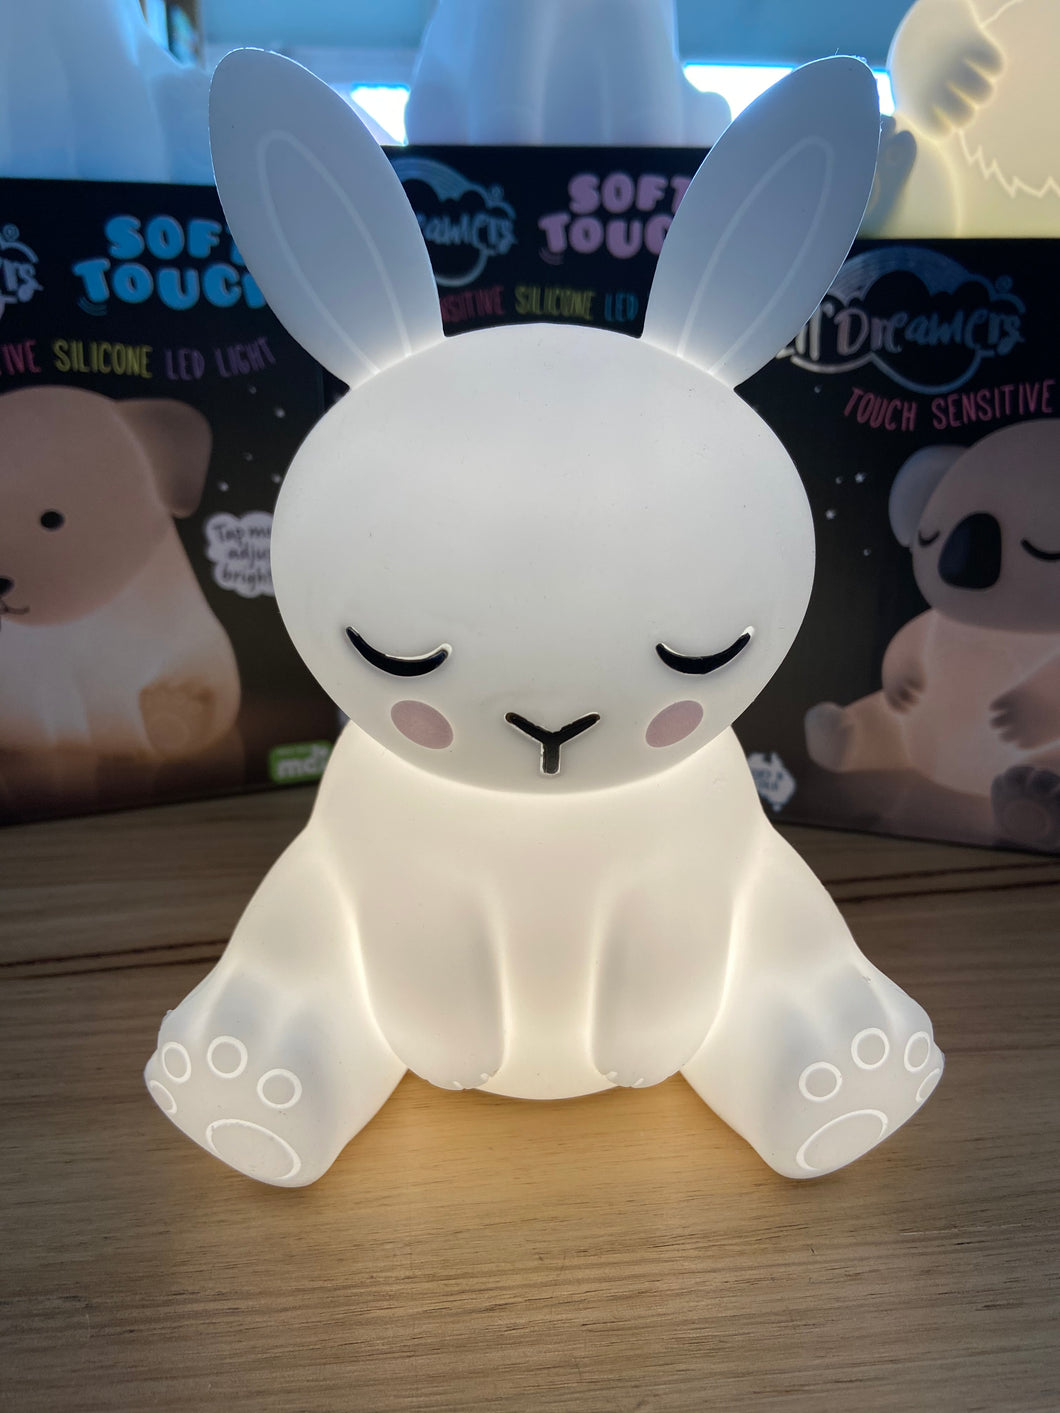 Lil Dreamers Soft Touch Silicone Bunny LED Night Light